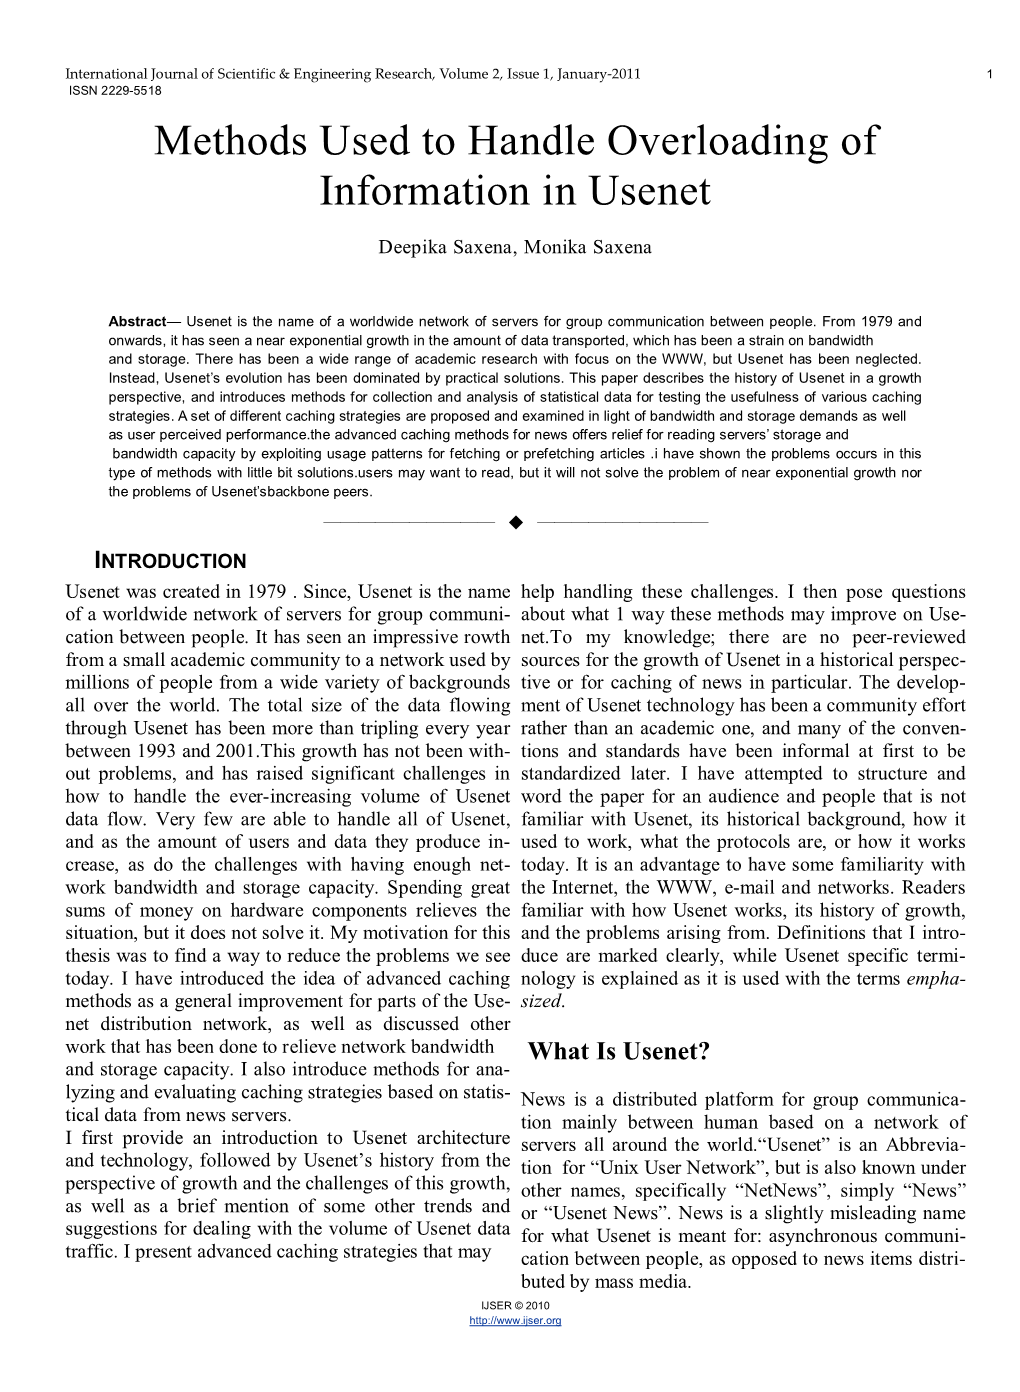 Methods Used to Handle Overloading of Information in Usenet